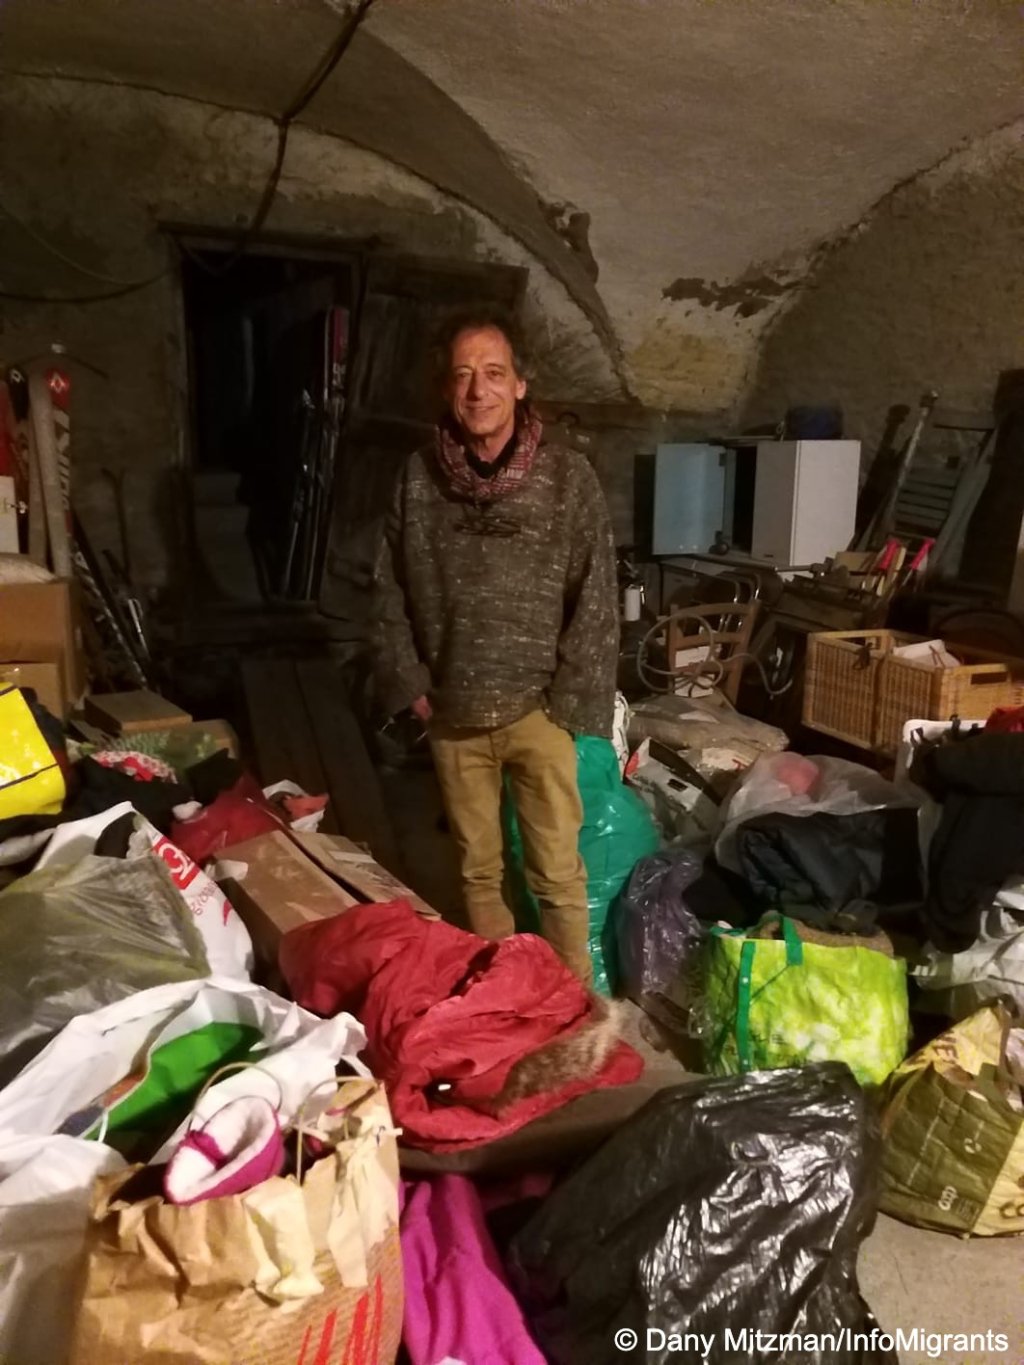 Anthropologist Piero Gorza stands in his garage surrounded by bags of donated clothing for migrants. He sometimes hosts families at his home when there is no room for them at the refuge | Photo: Dany Mitzman / InfoMigrants